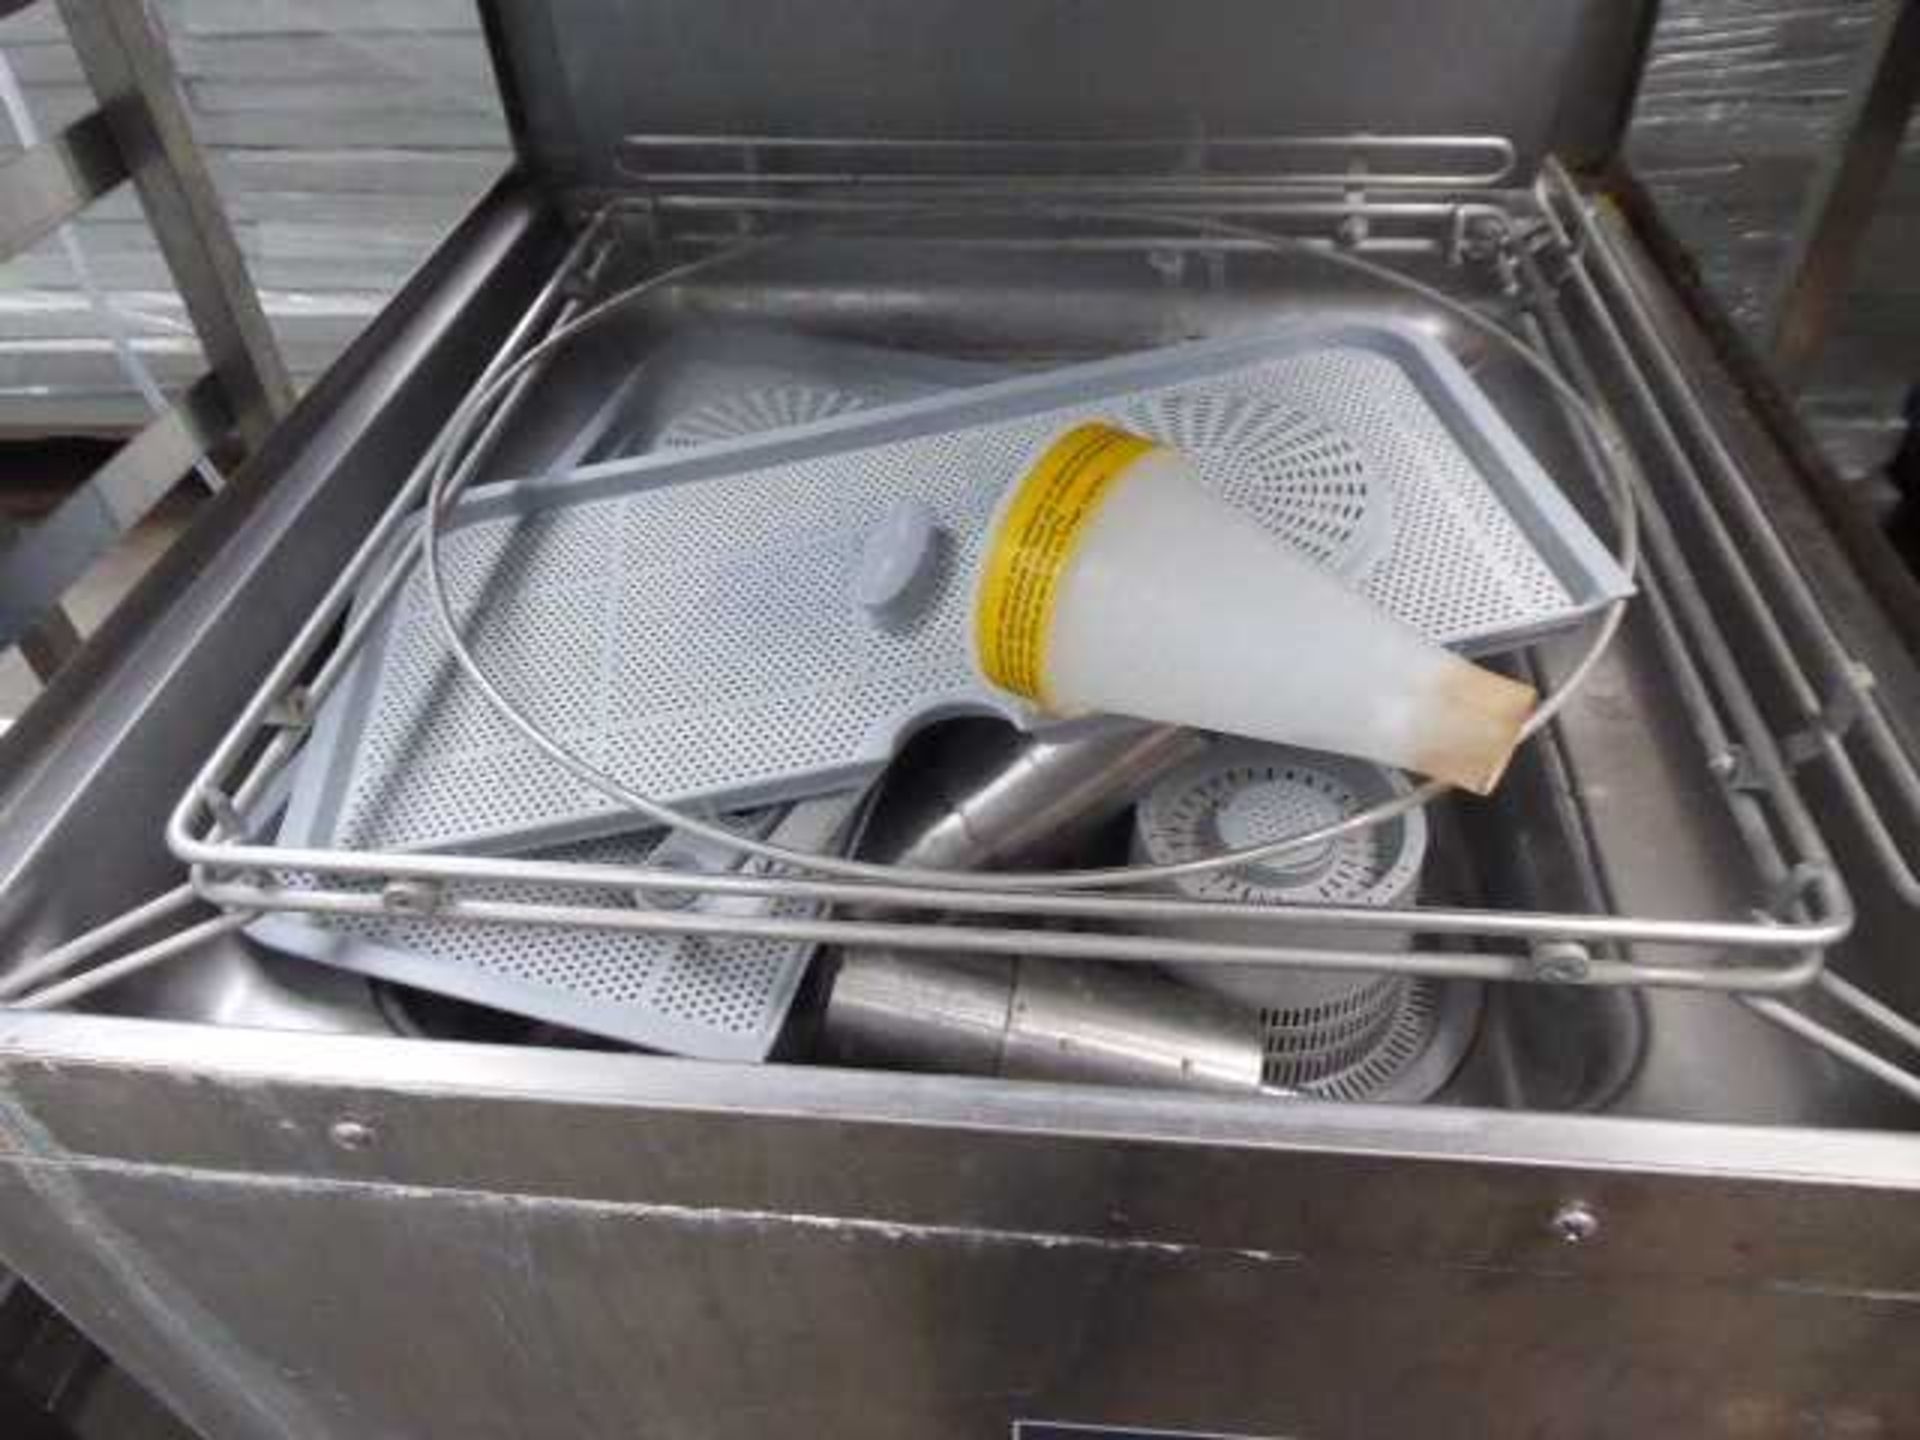 62cm Maidaid C1035WS lift top pass through dish washer with associated draining board and sink - Image 2 of 5